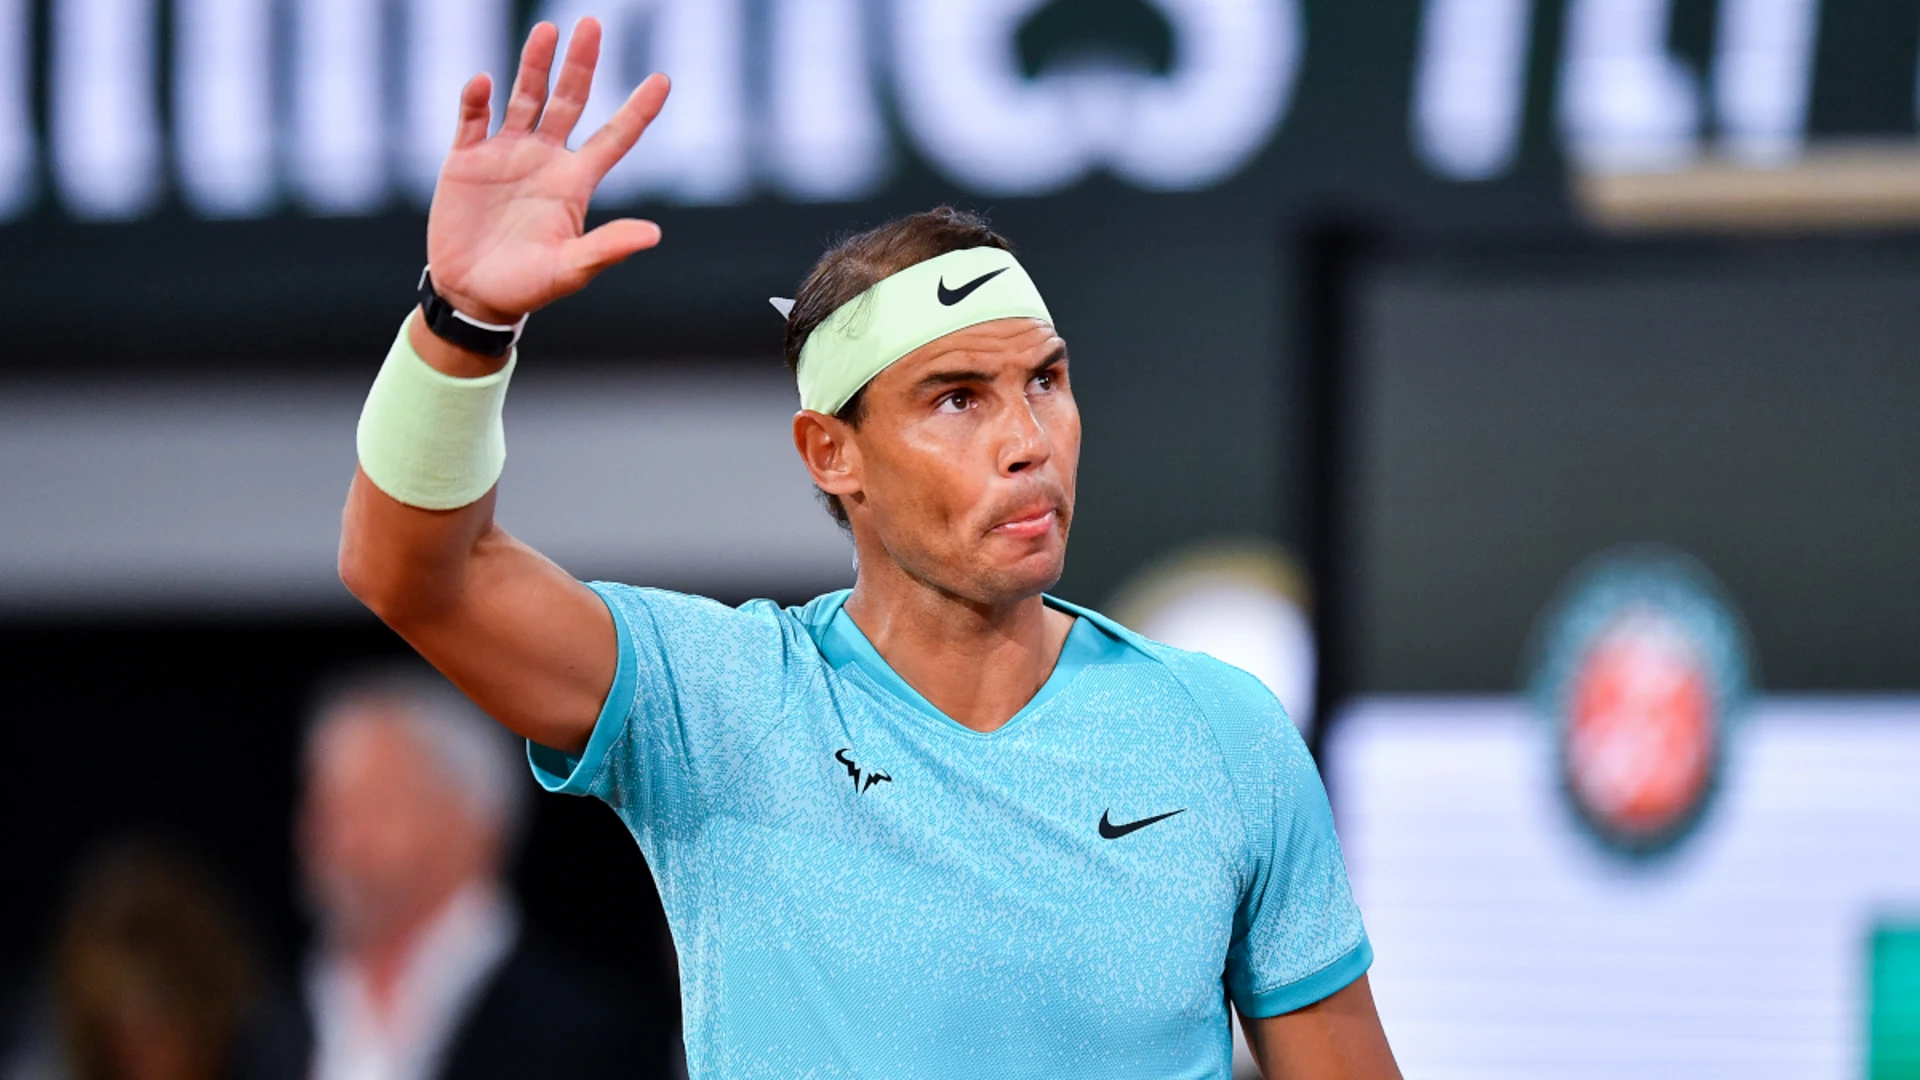 Nadal defeated in first tour final in two years